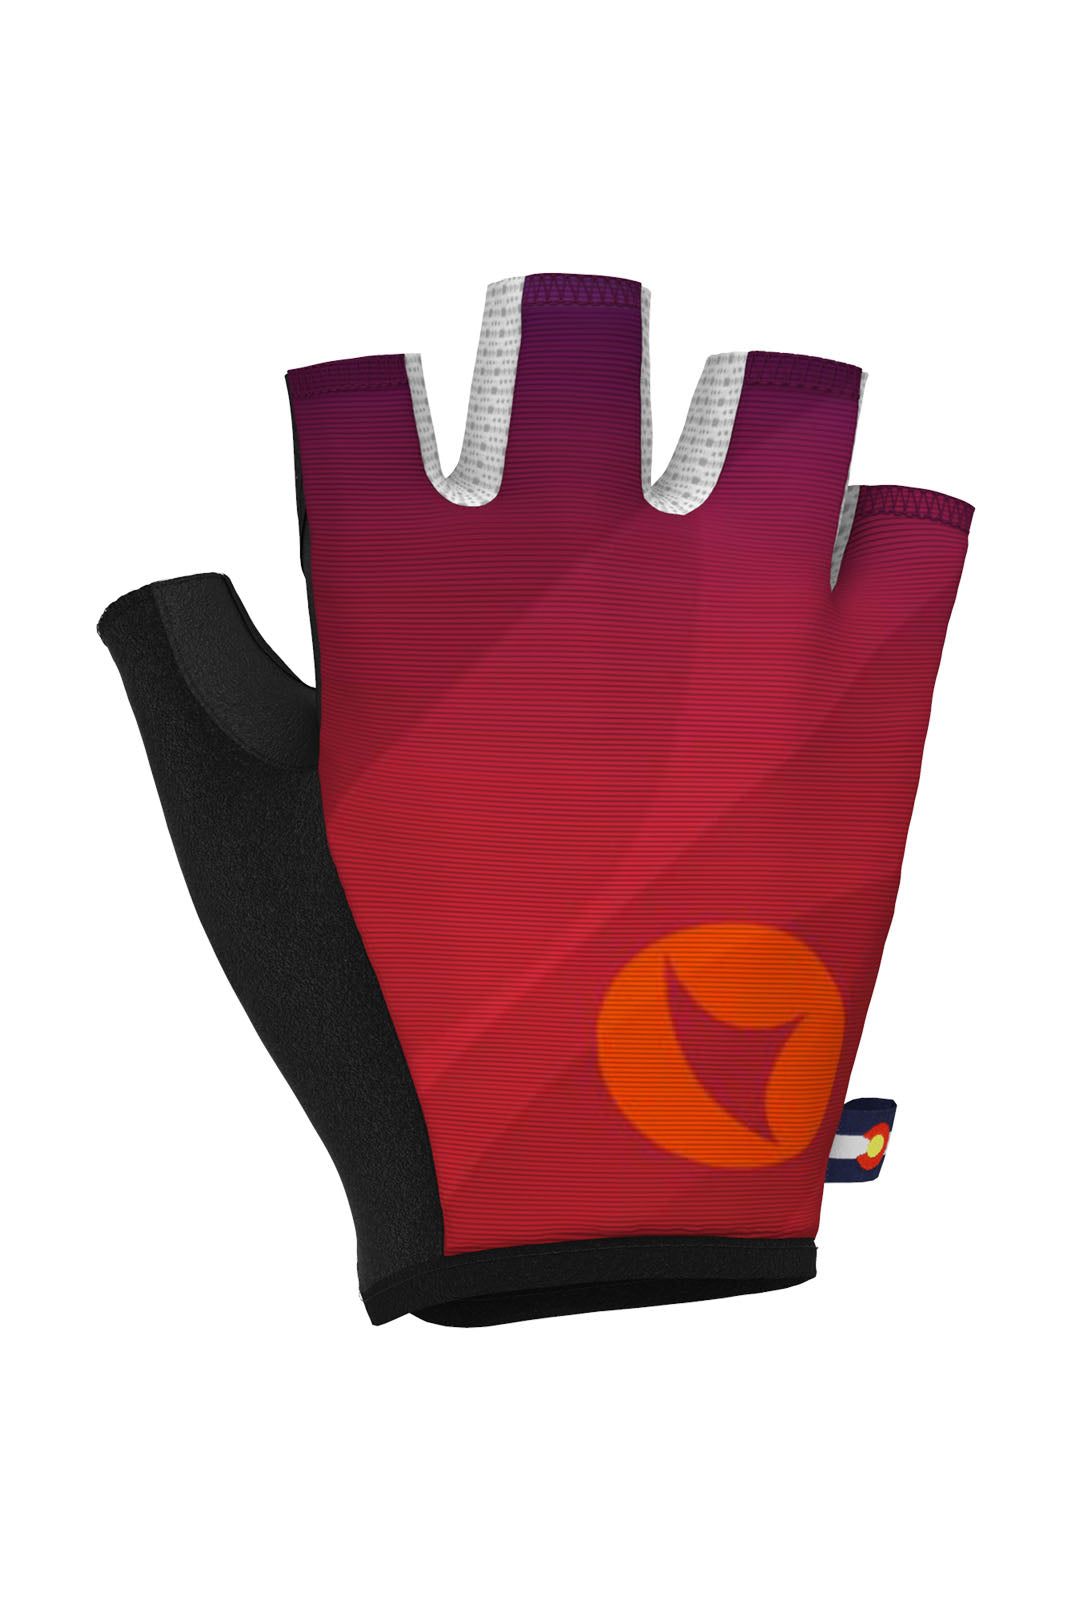 PAC Cycling Gloves - Warm Fade